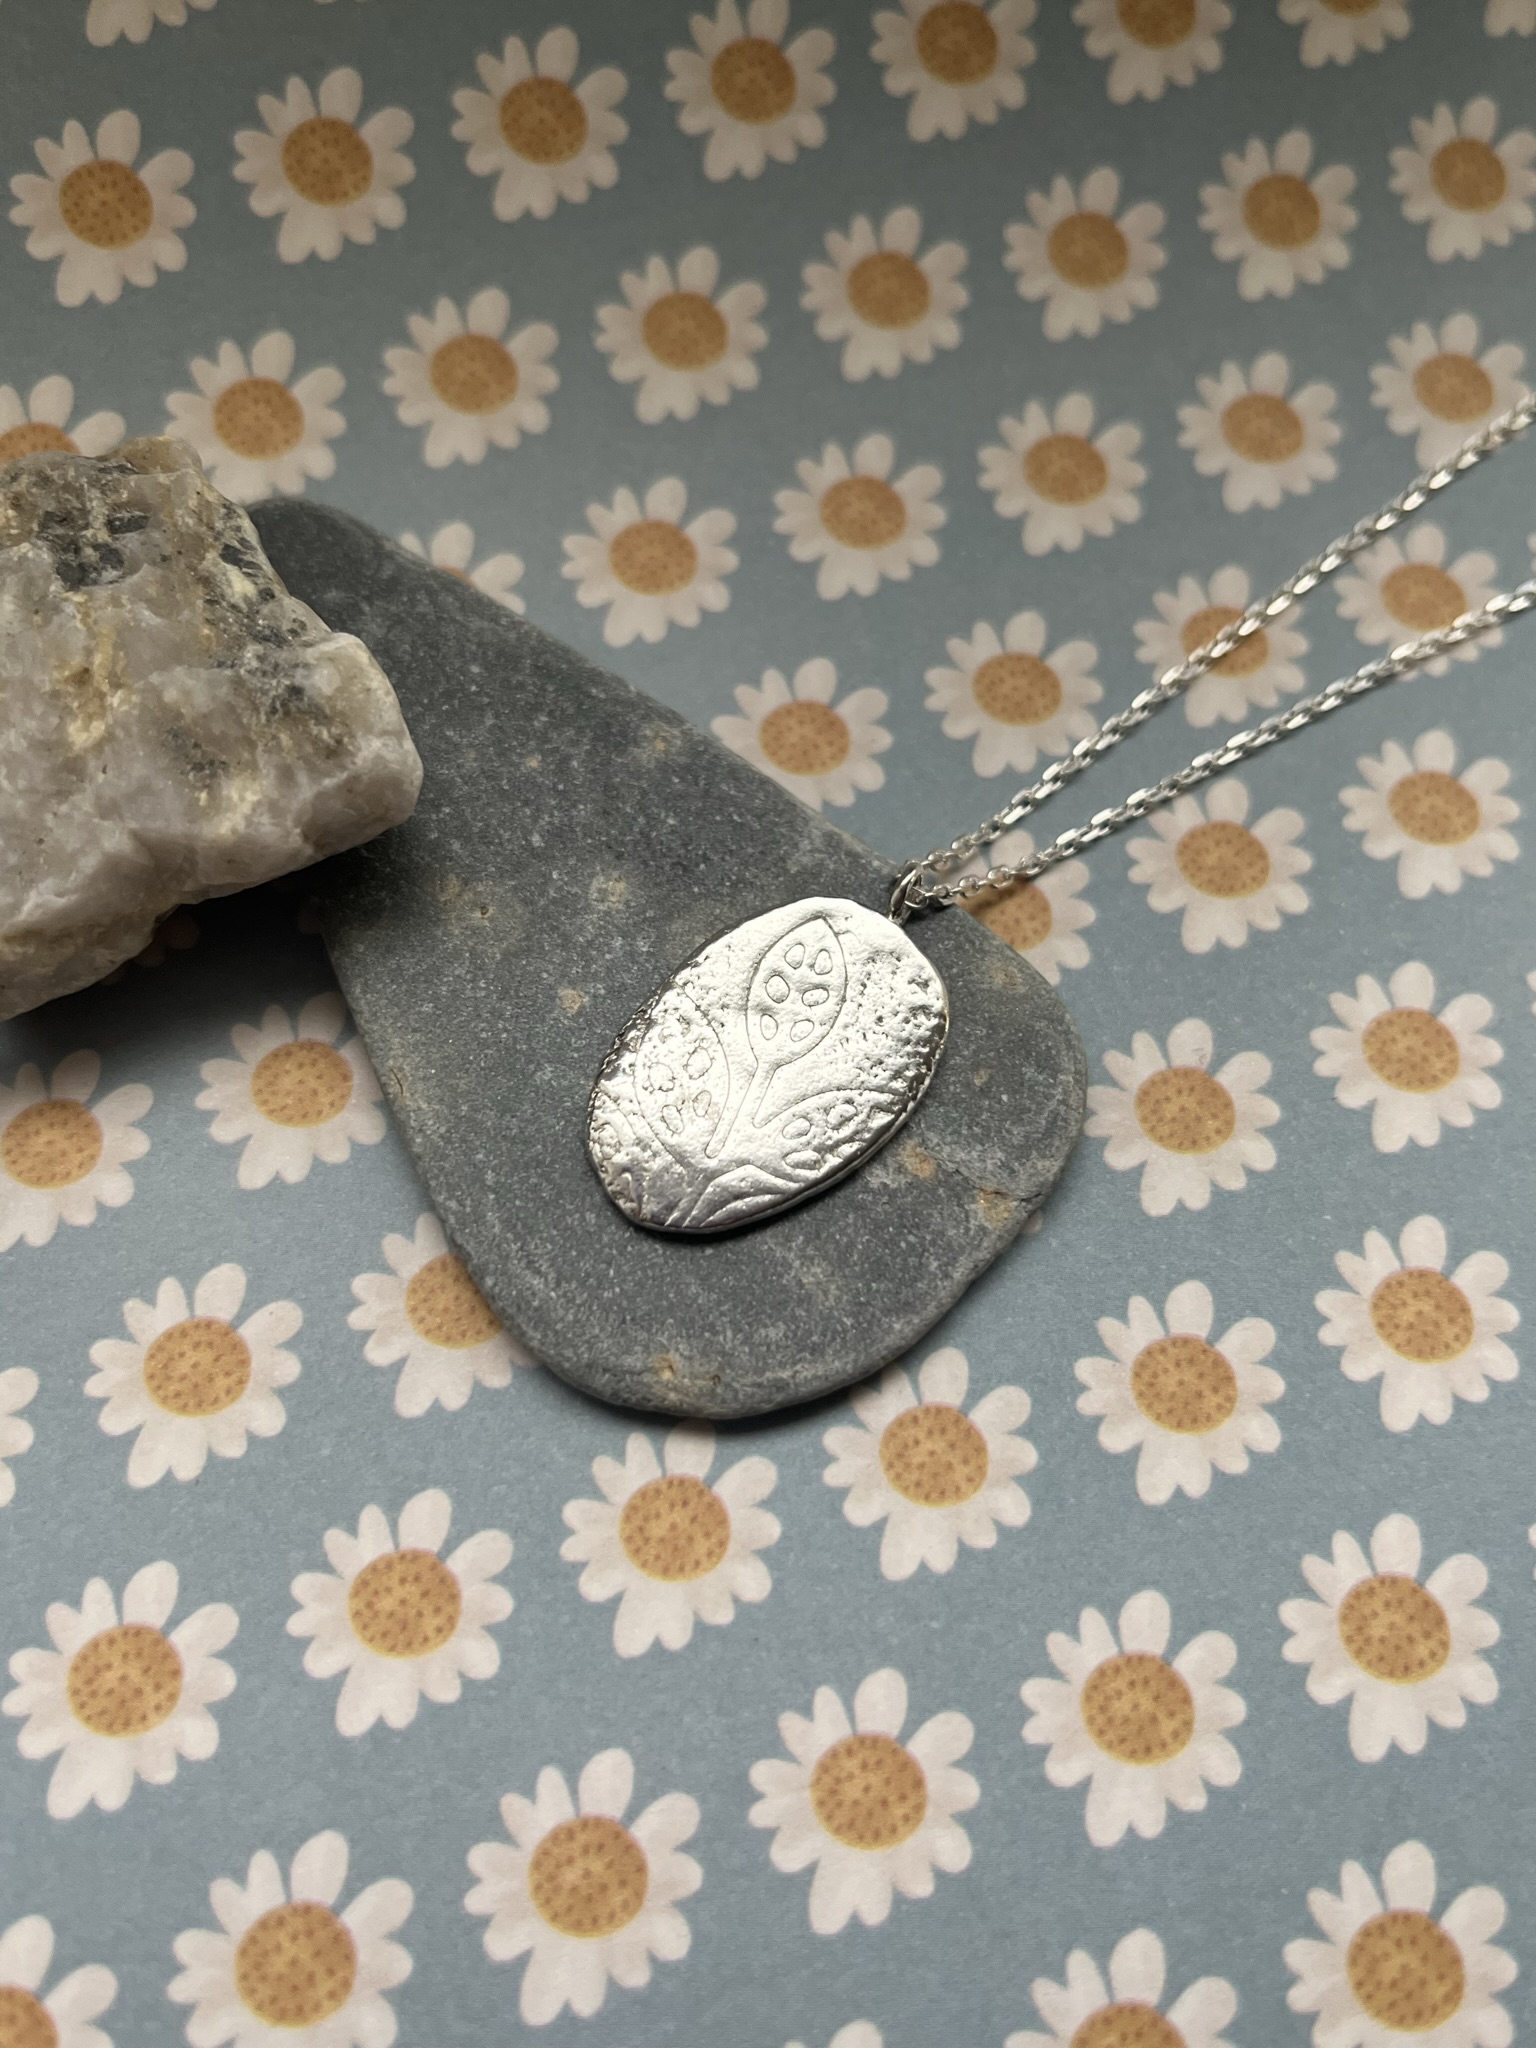 silver metal clay 101 - answers to some frequently asked questions —  Jewellers Academy